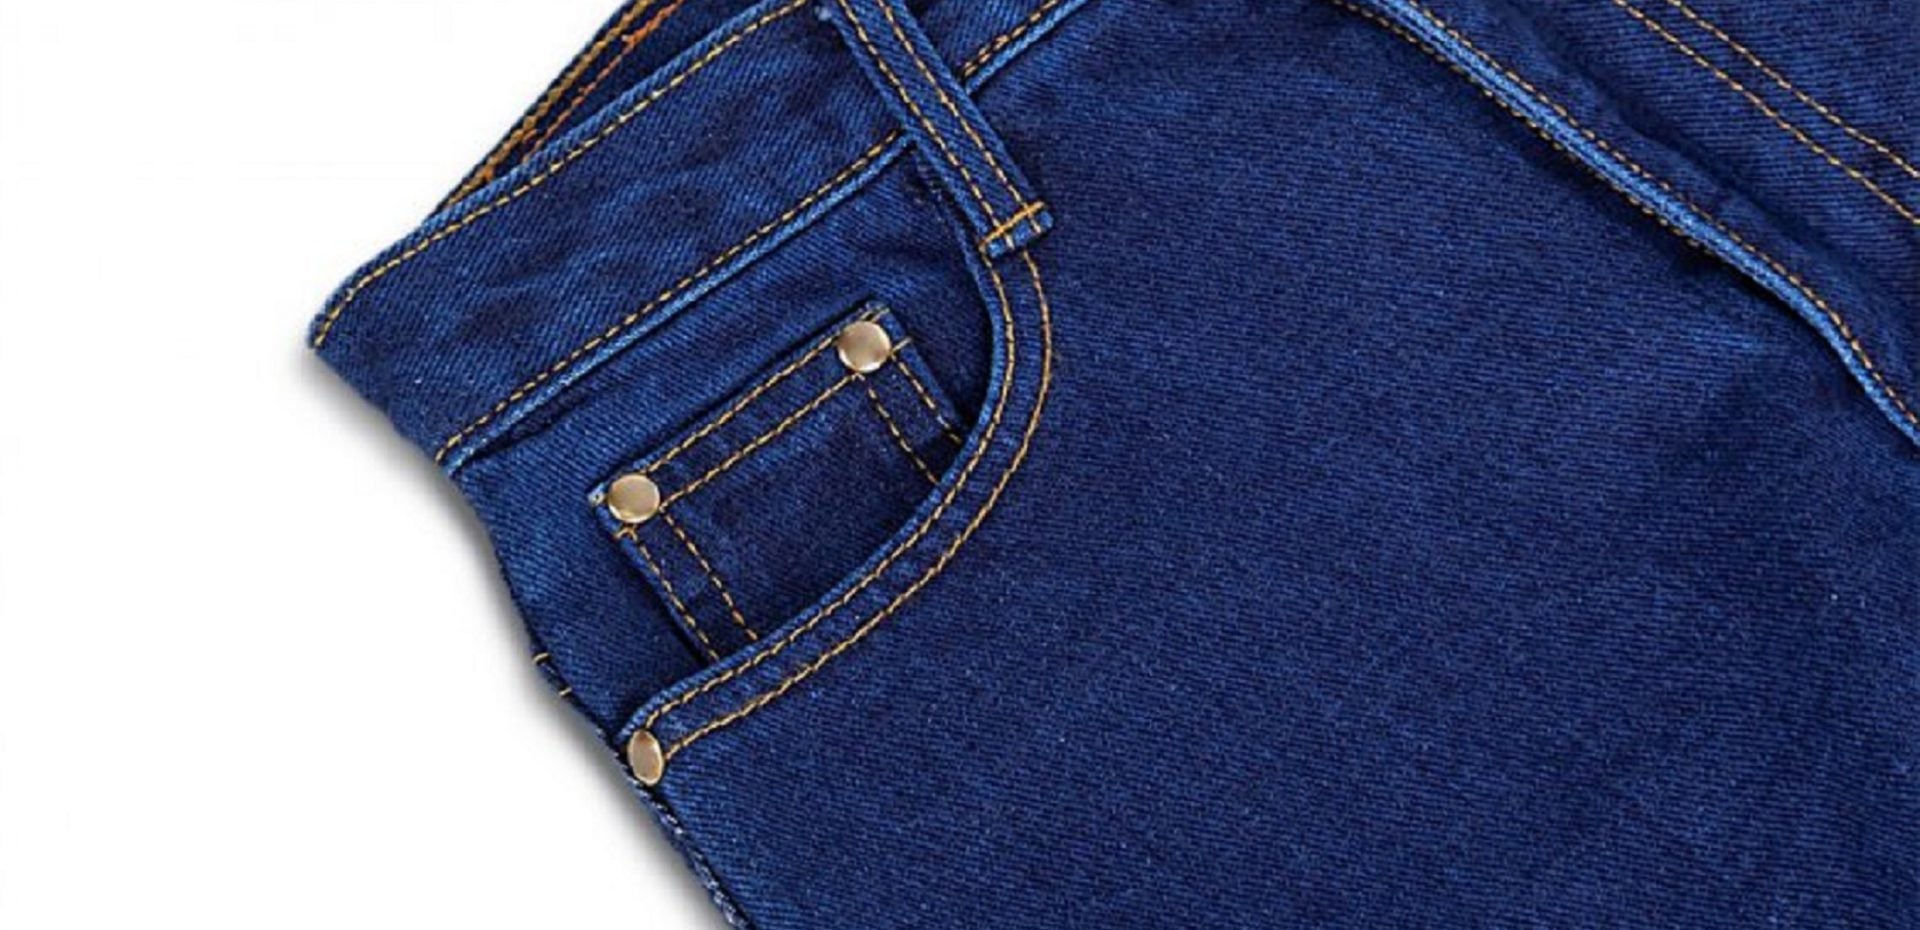 Small Pocket on Jeans